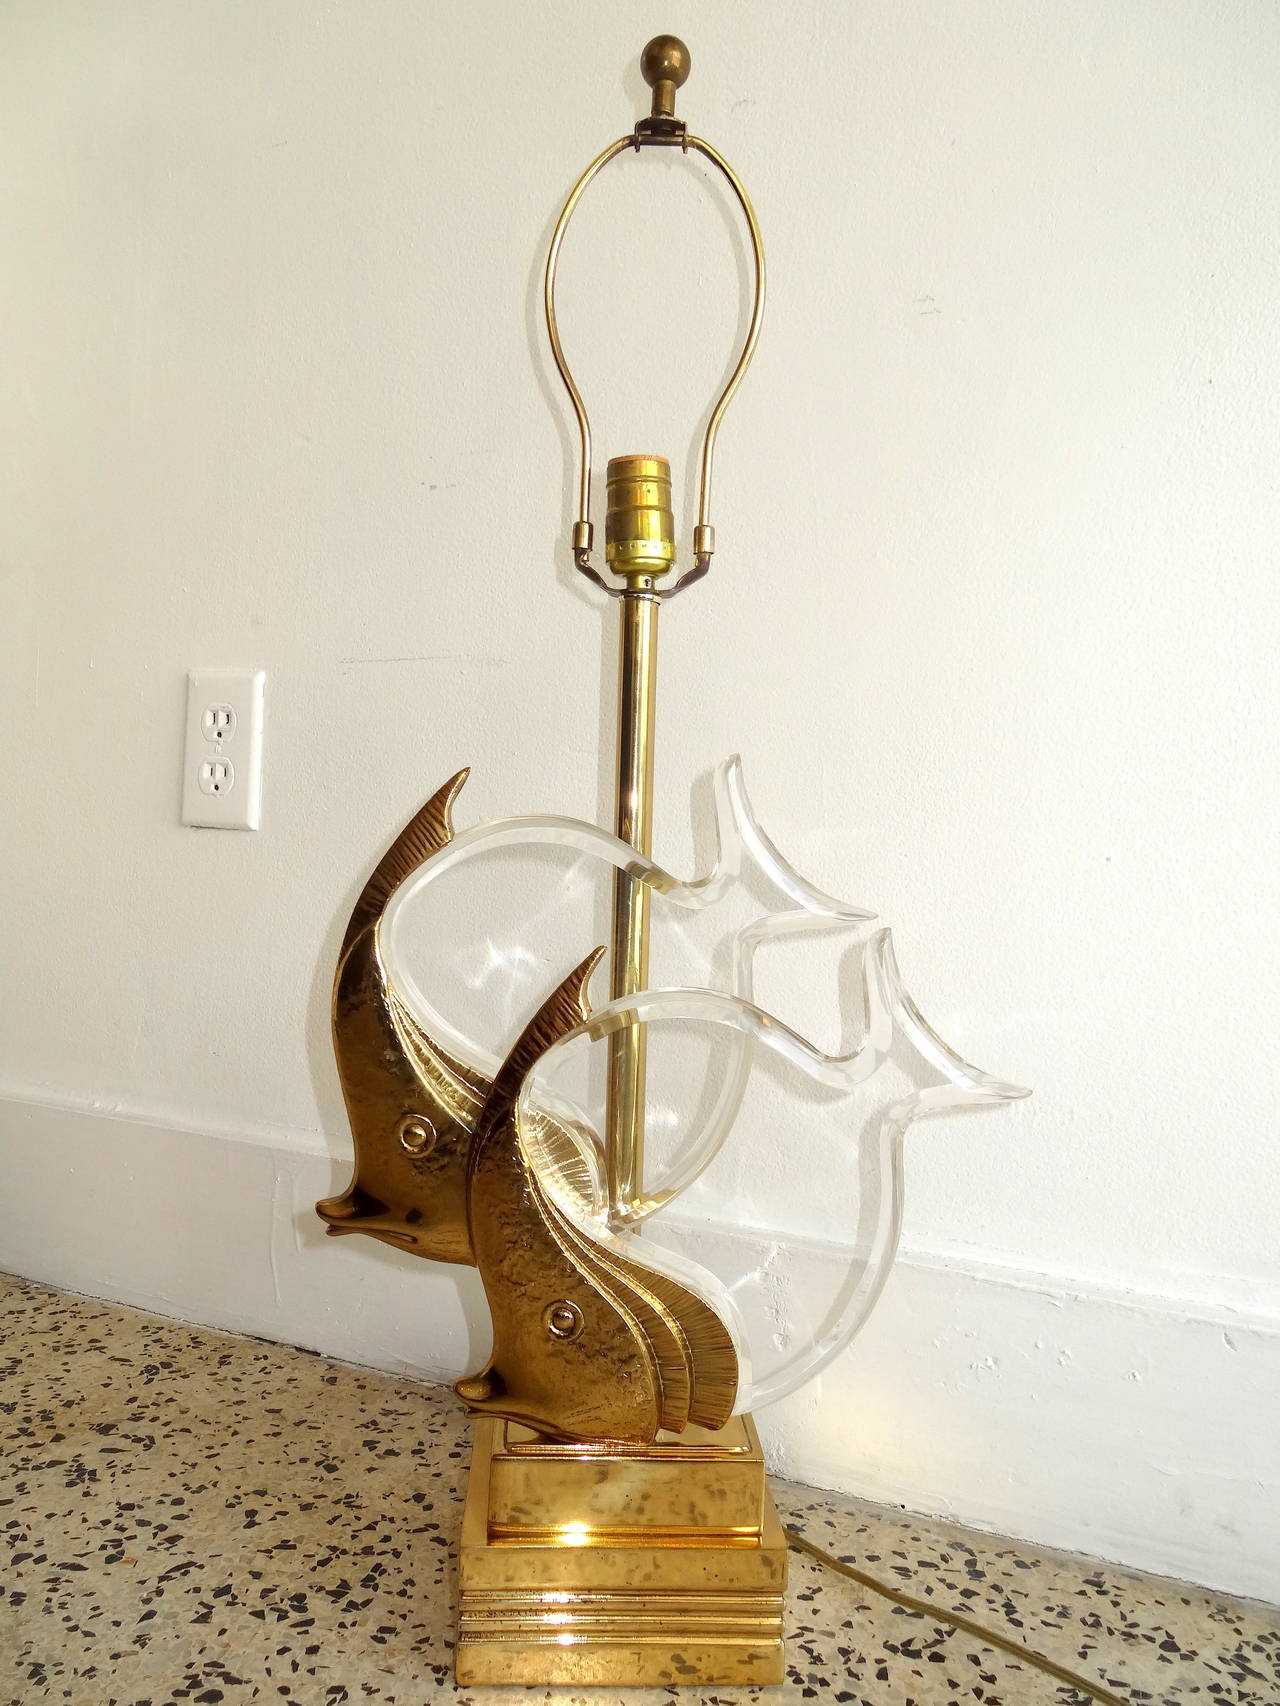 A brass and Lucite lamp having a pair of fish mounted in Lucite. The lamp has great scale and attention to detail. First quality. Possibly Italian. Height to the top of the fish is 17